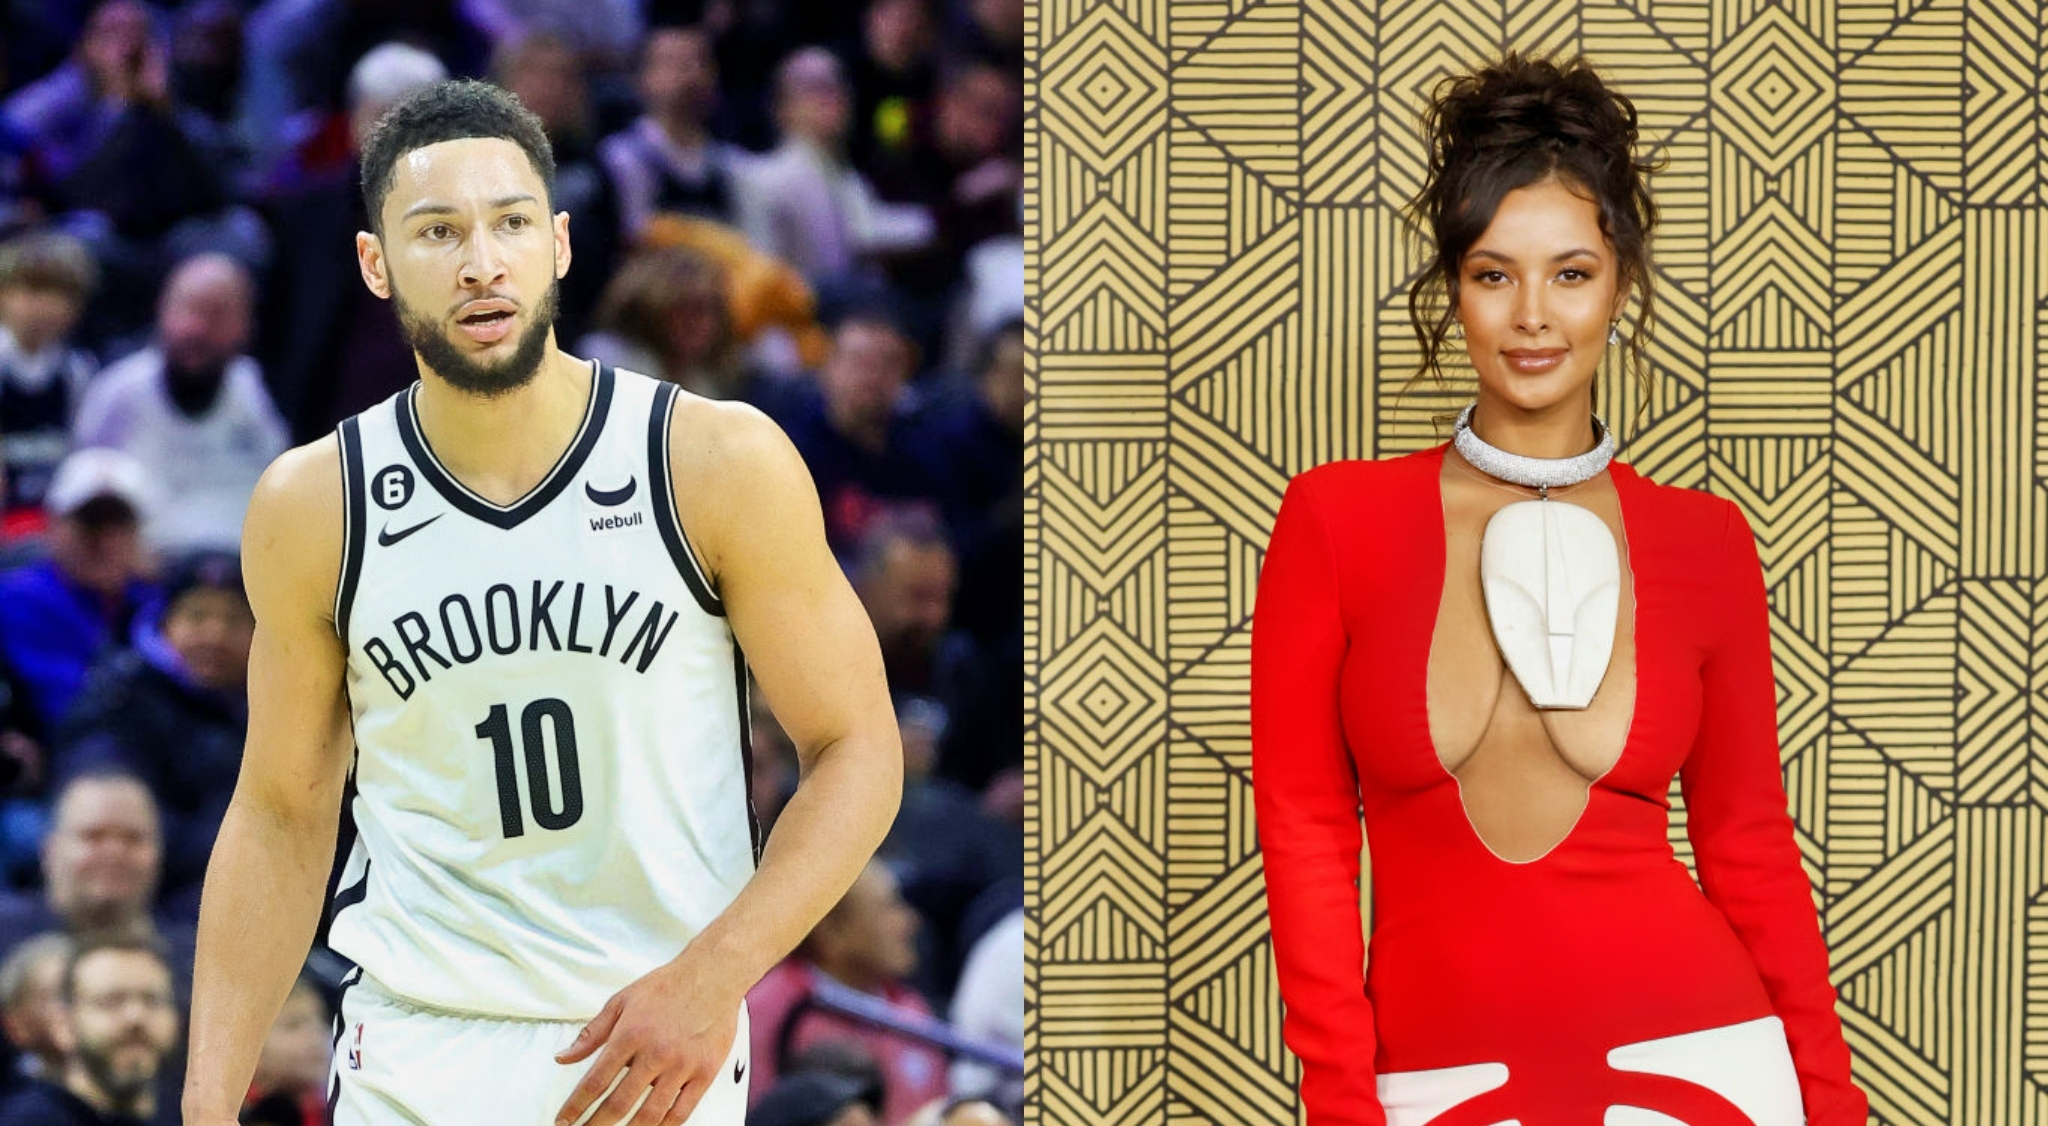 Ben Simmons Asked His $1 Million Engagement Ring Back From Ex